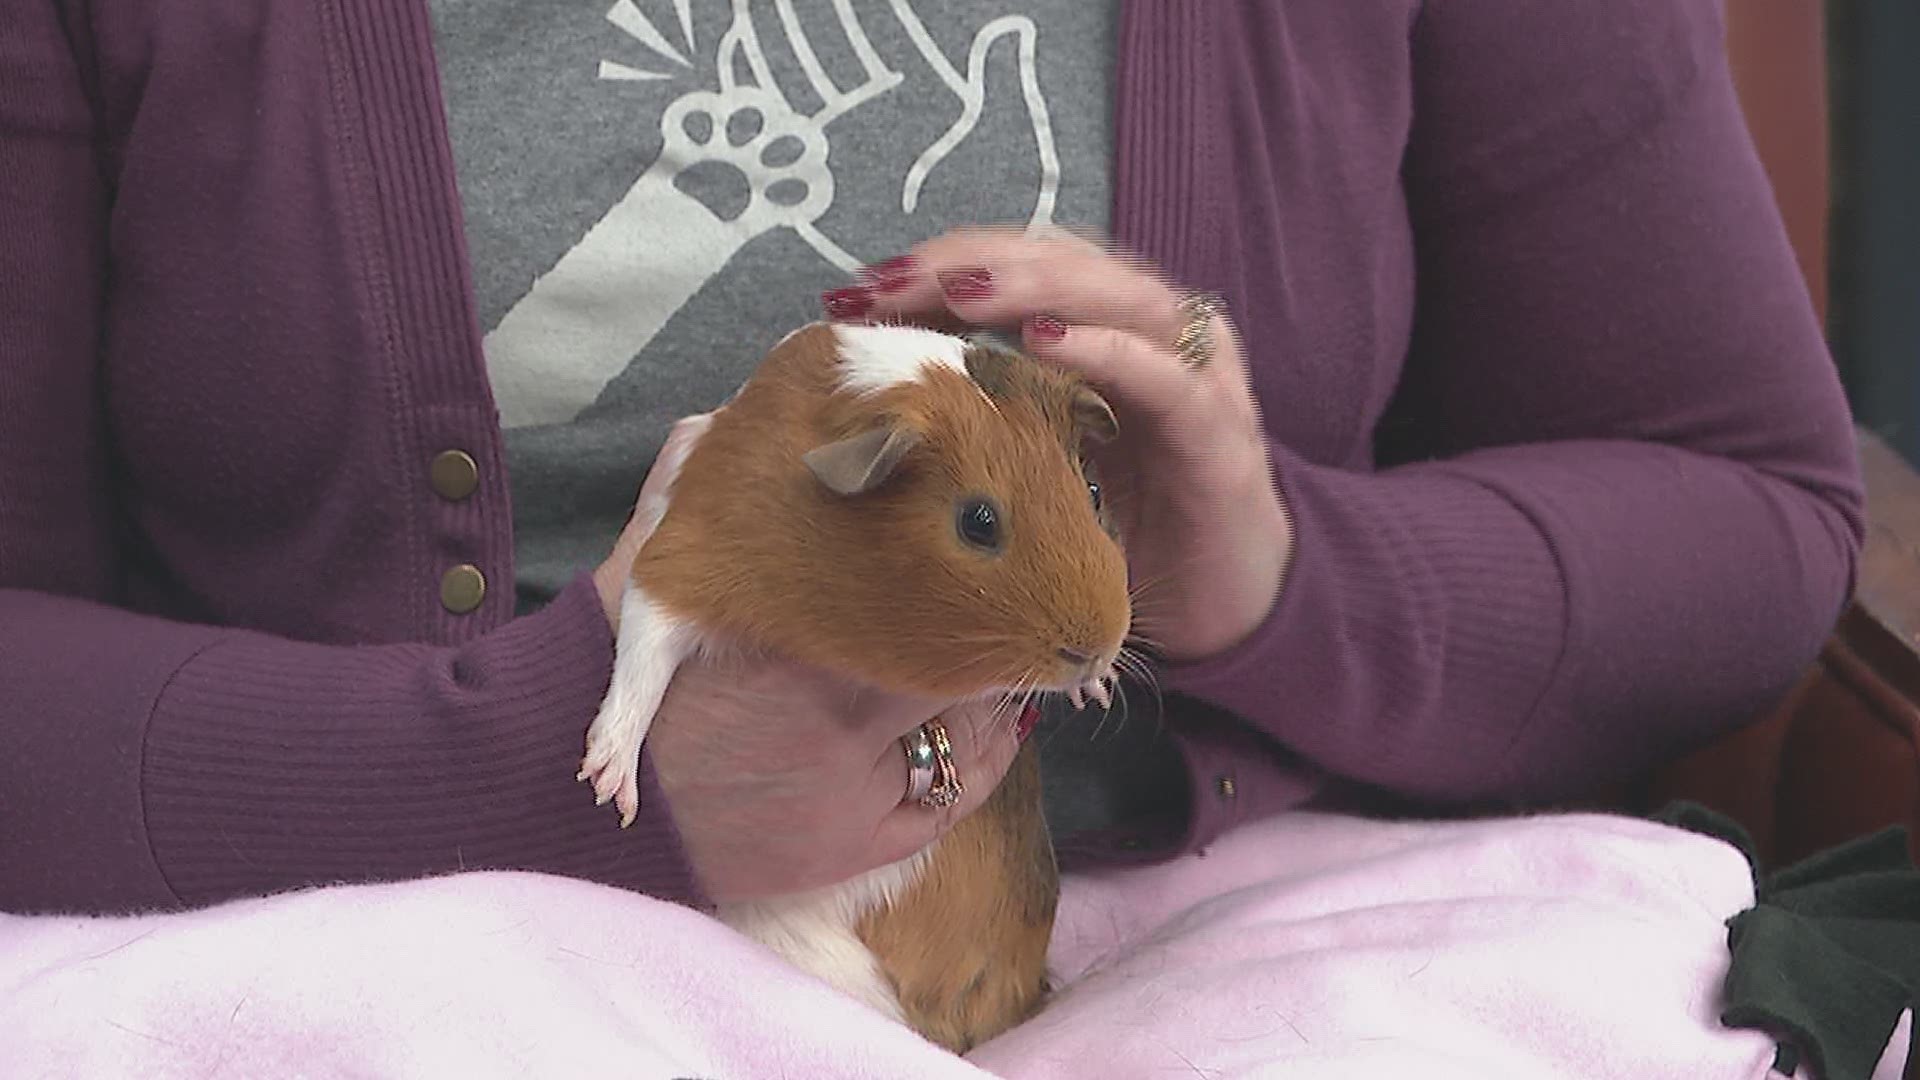 Pet of the Week: Elijah the Guinea Pig from the Quad City Animal Welfare Center